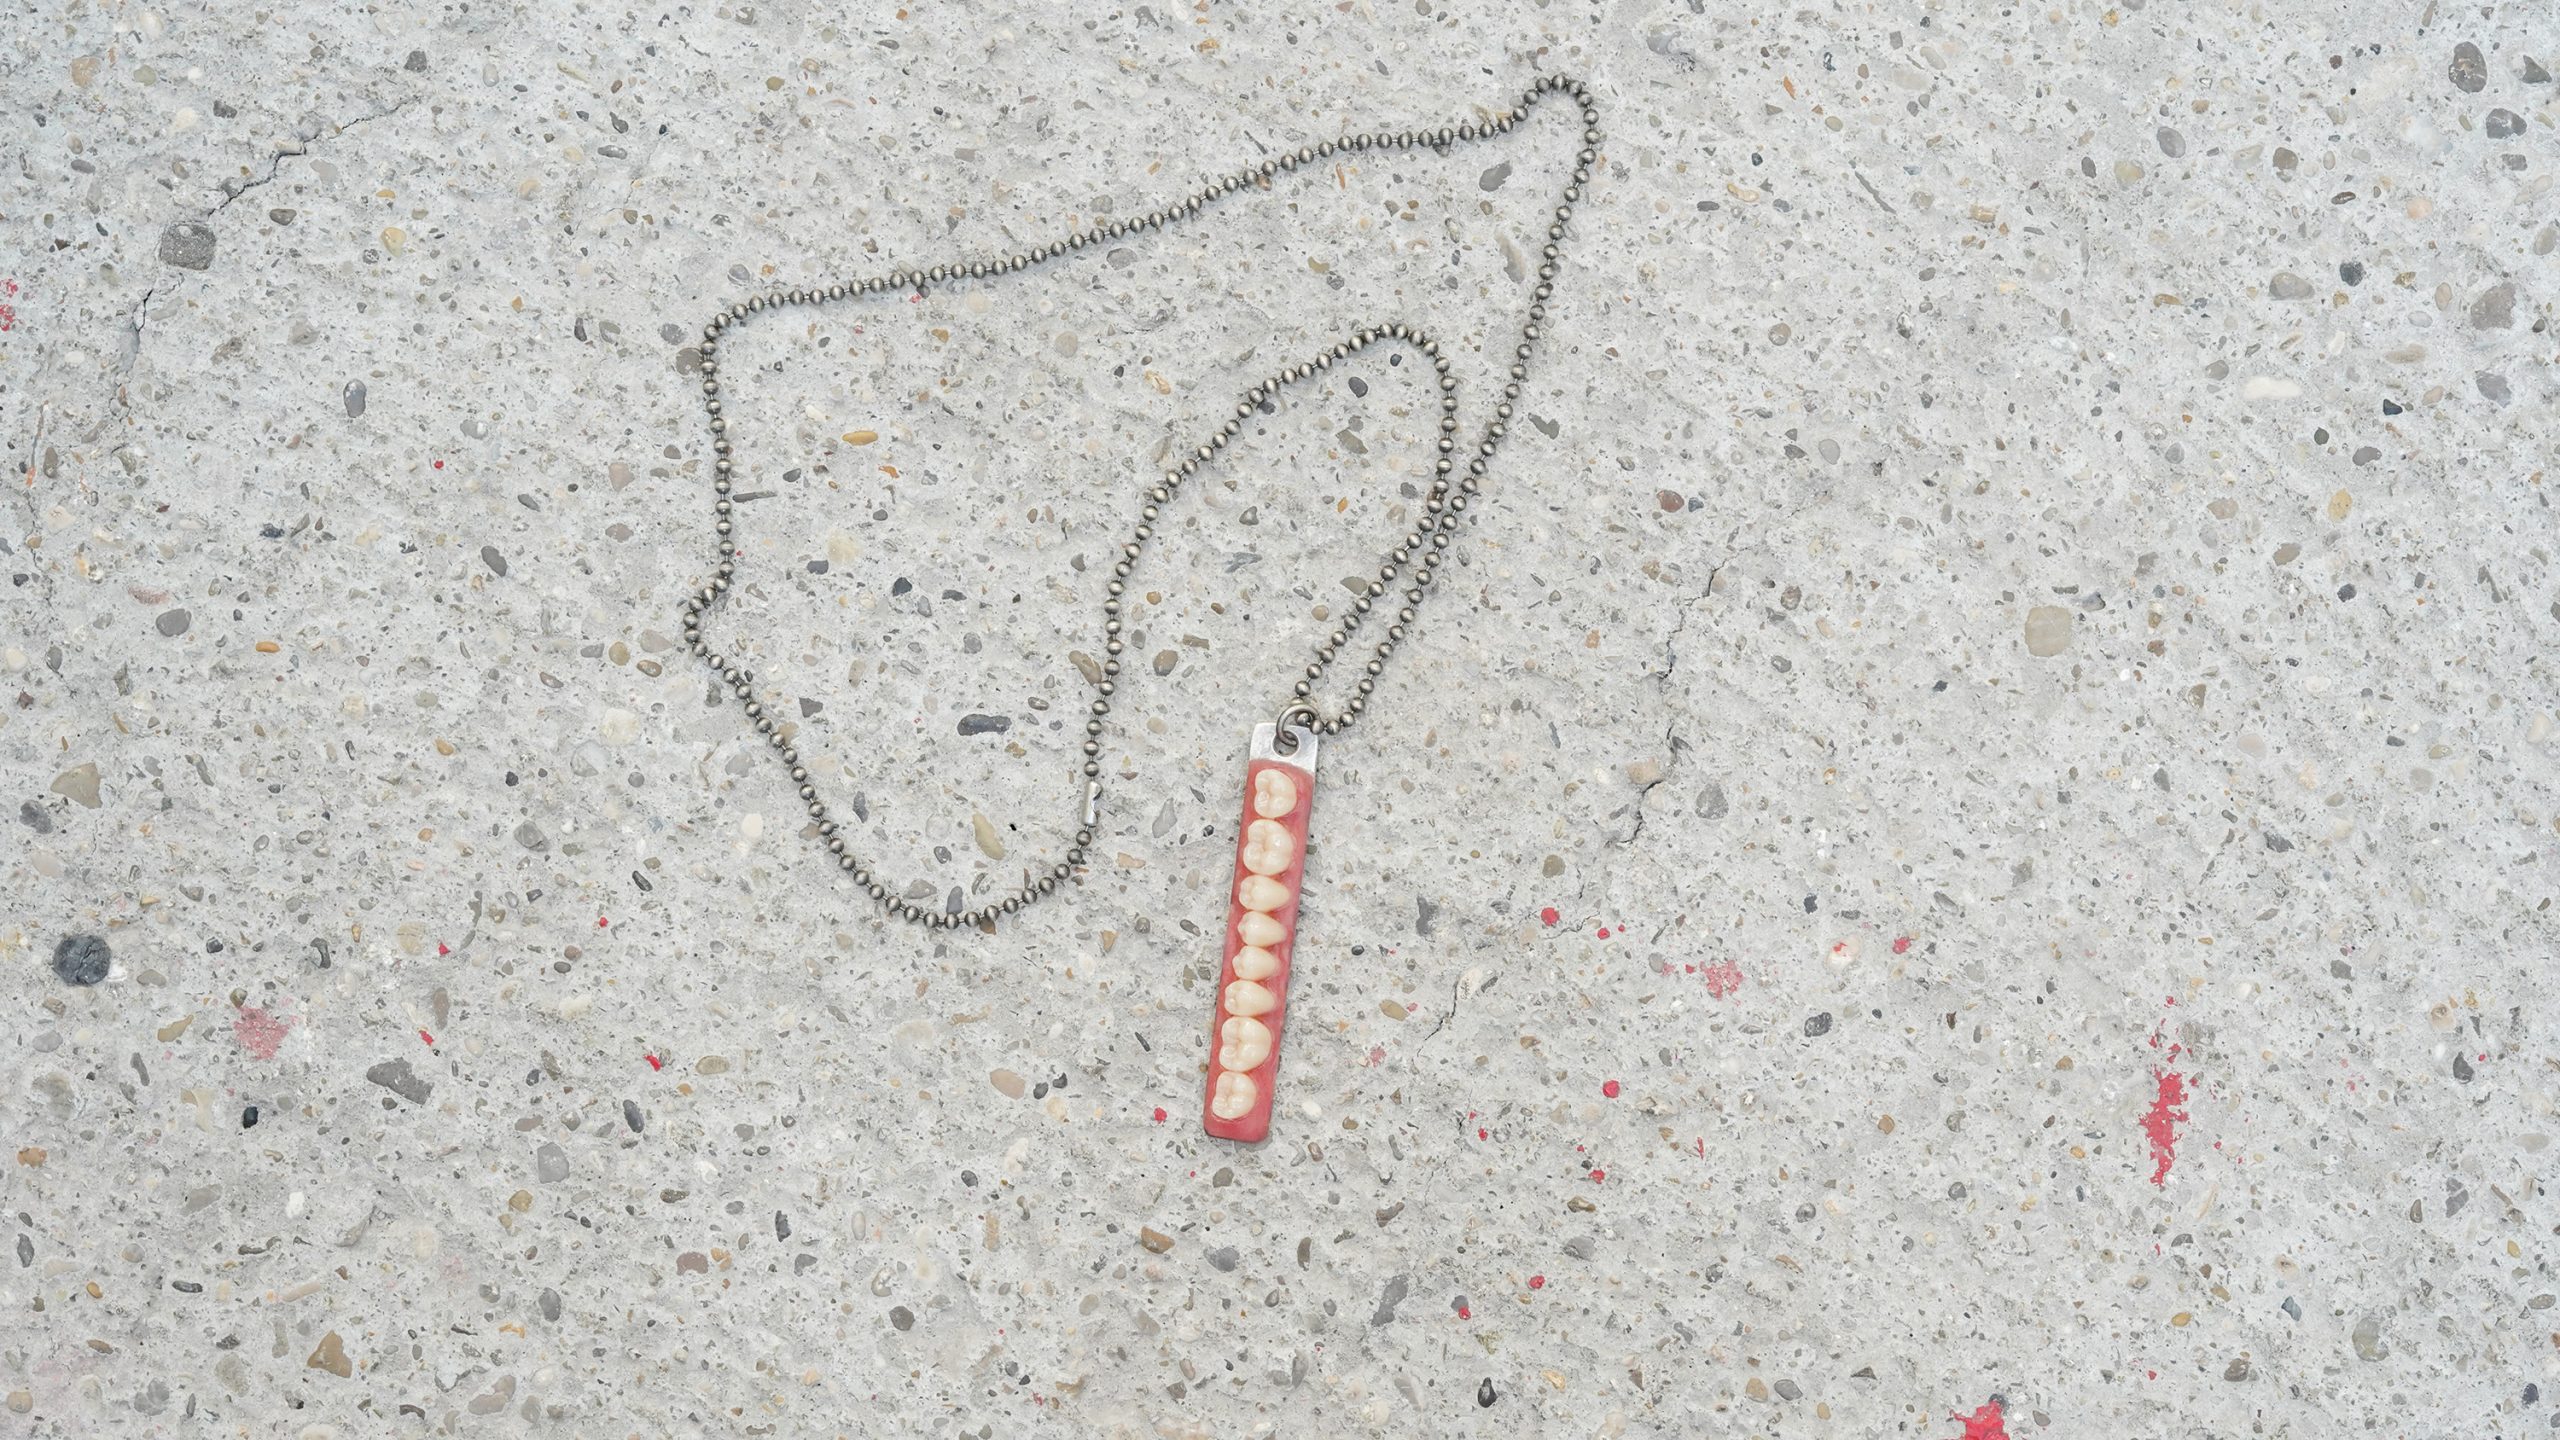 MM/1480 PENDANT WITH EIGHT RESERVE TEETH